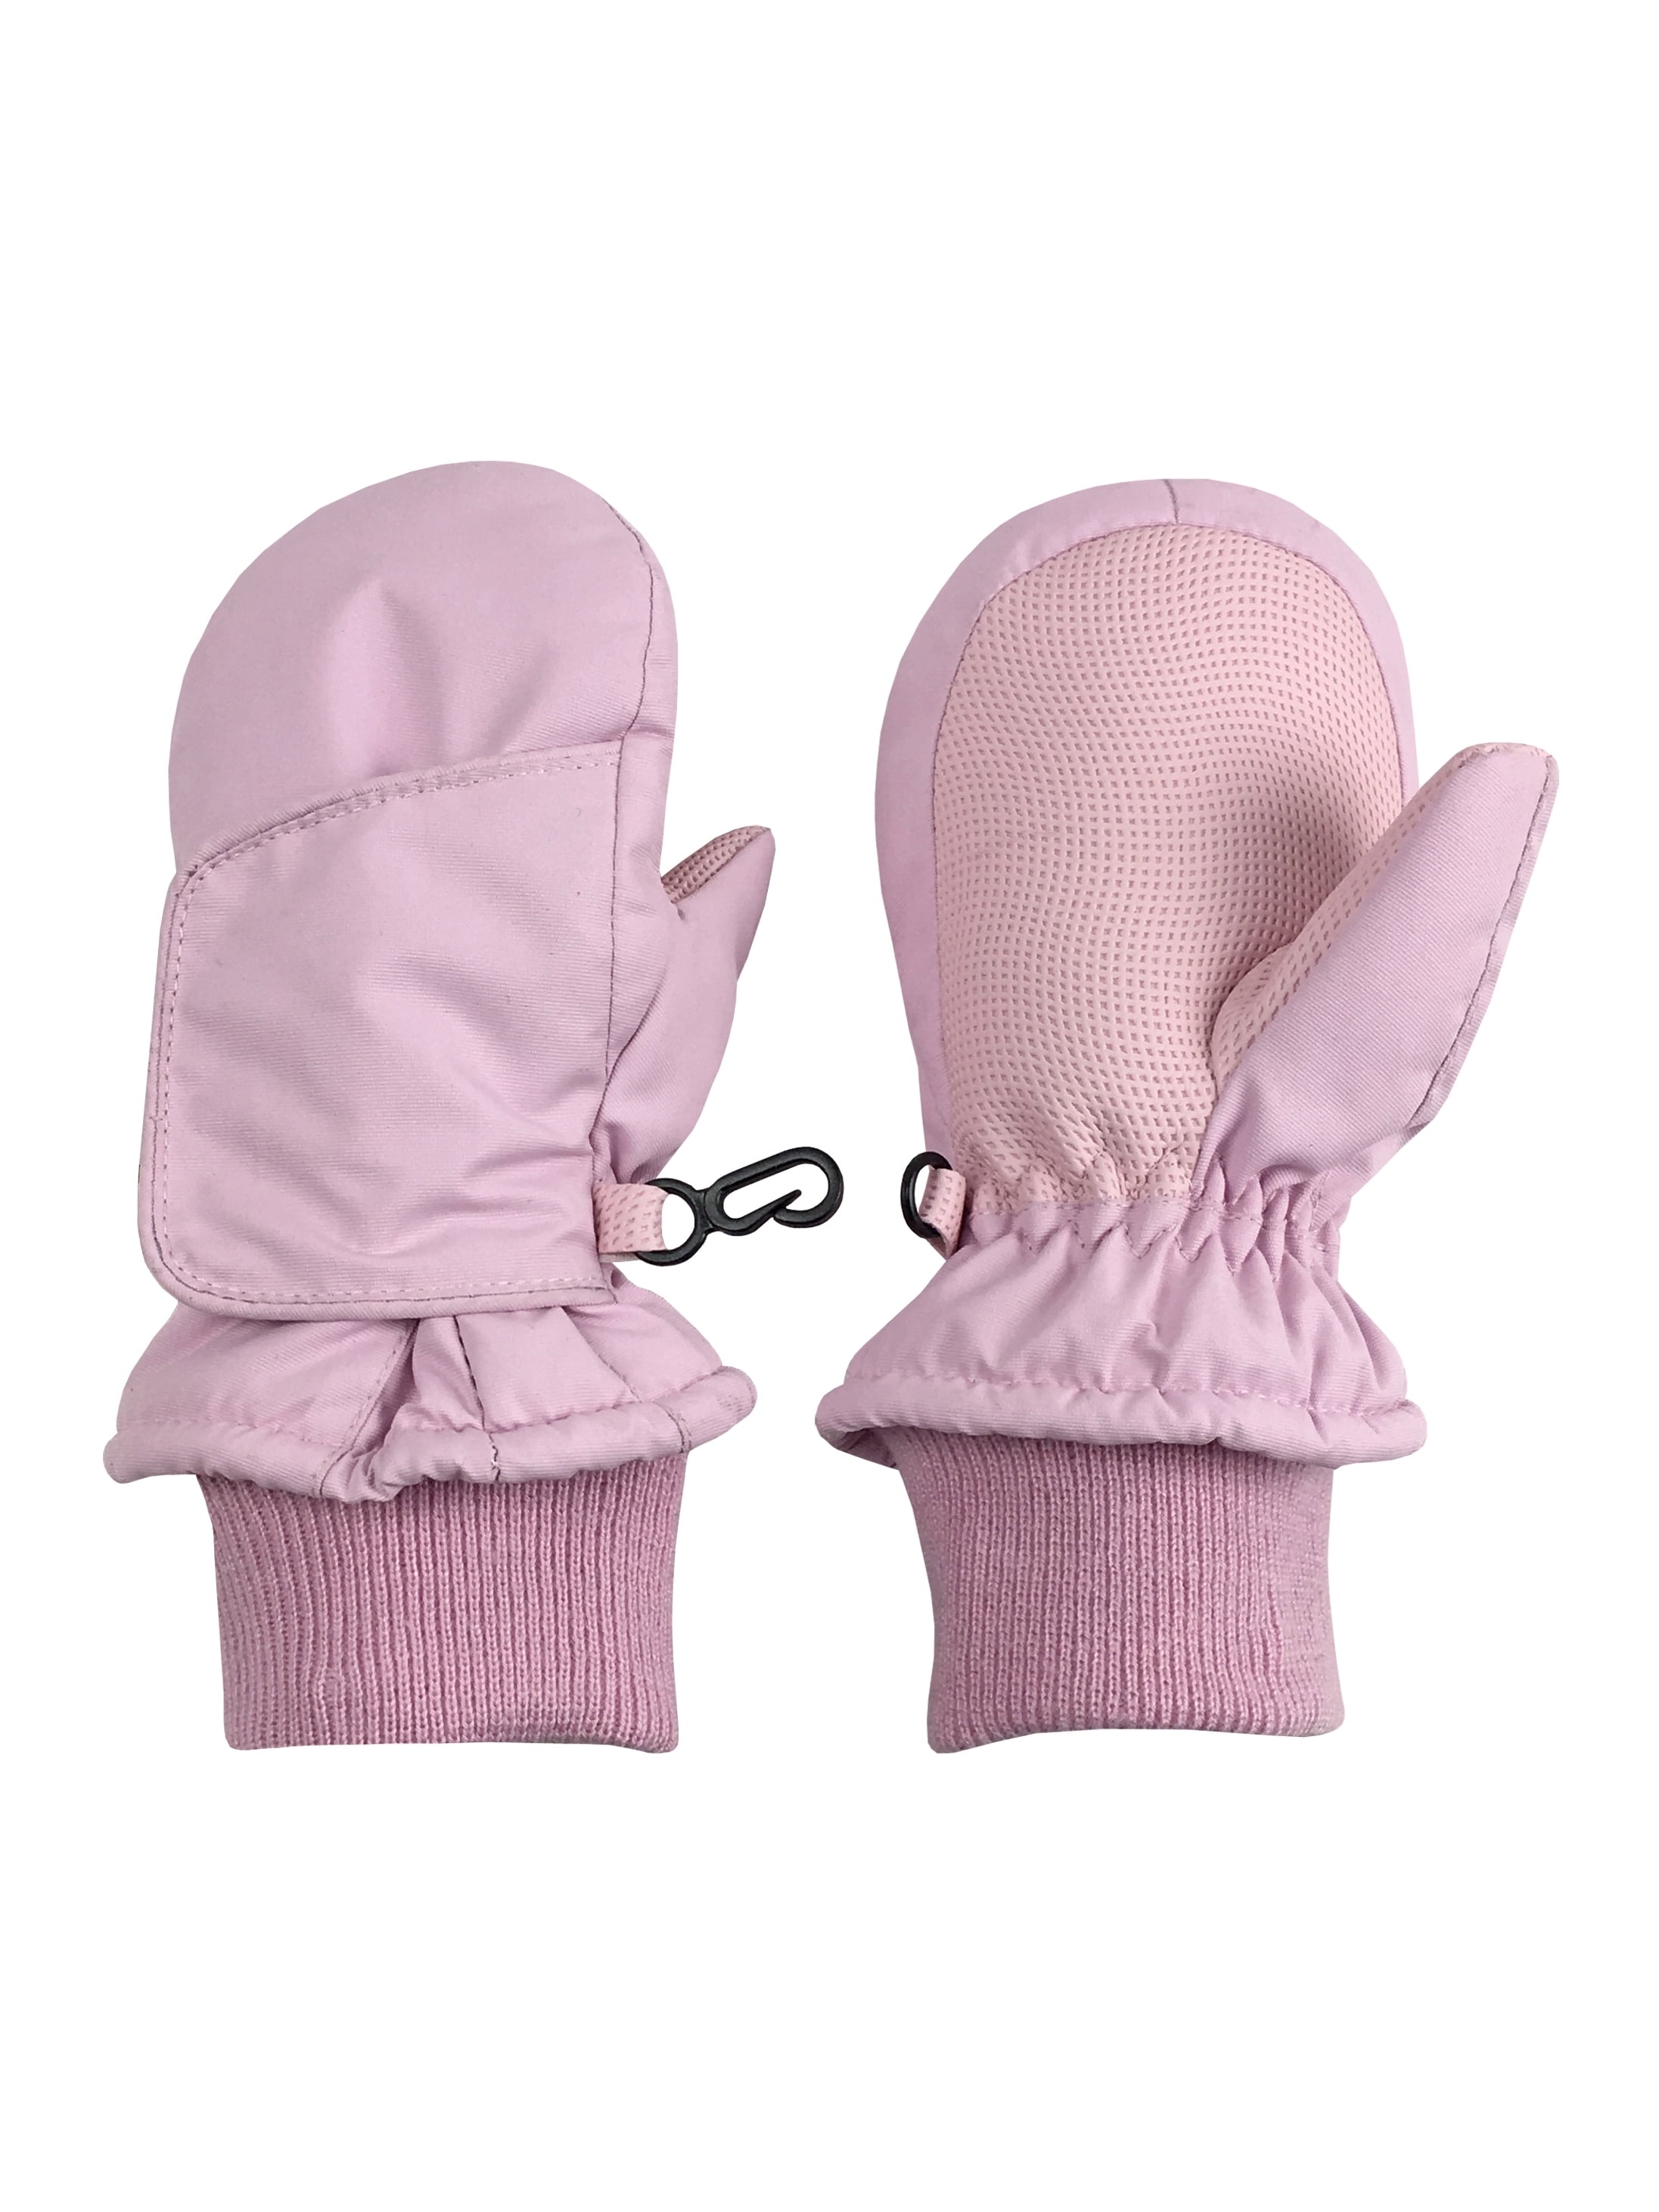 waterproof and warm pink mittens 1-2 years